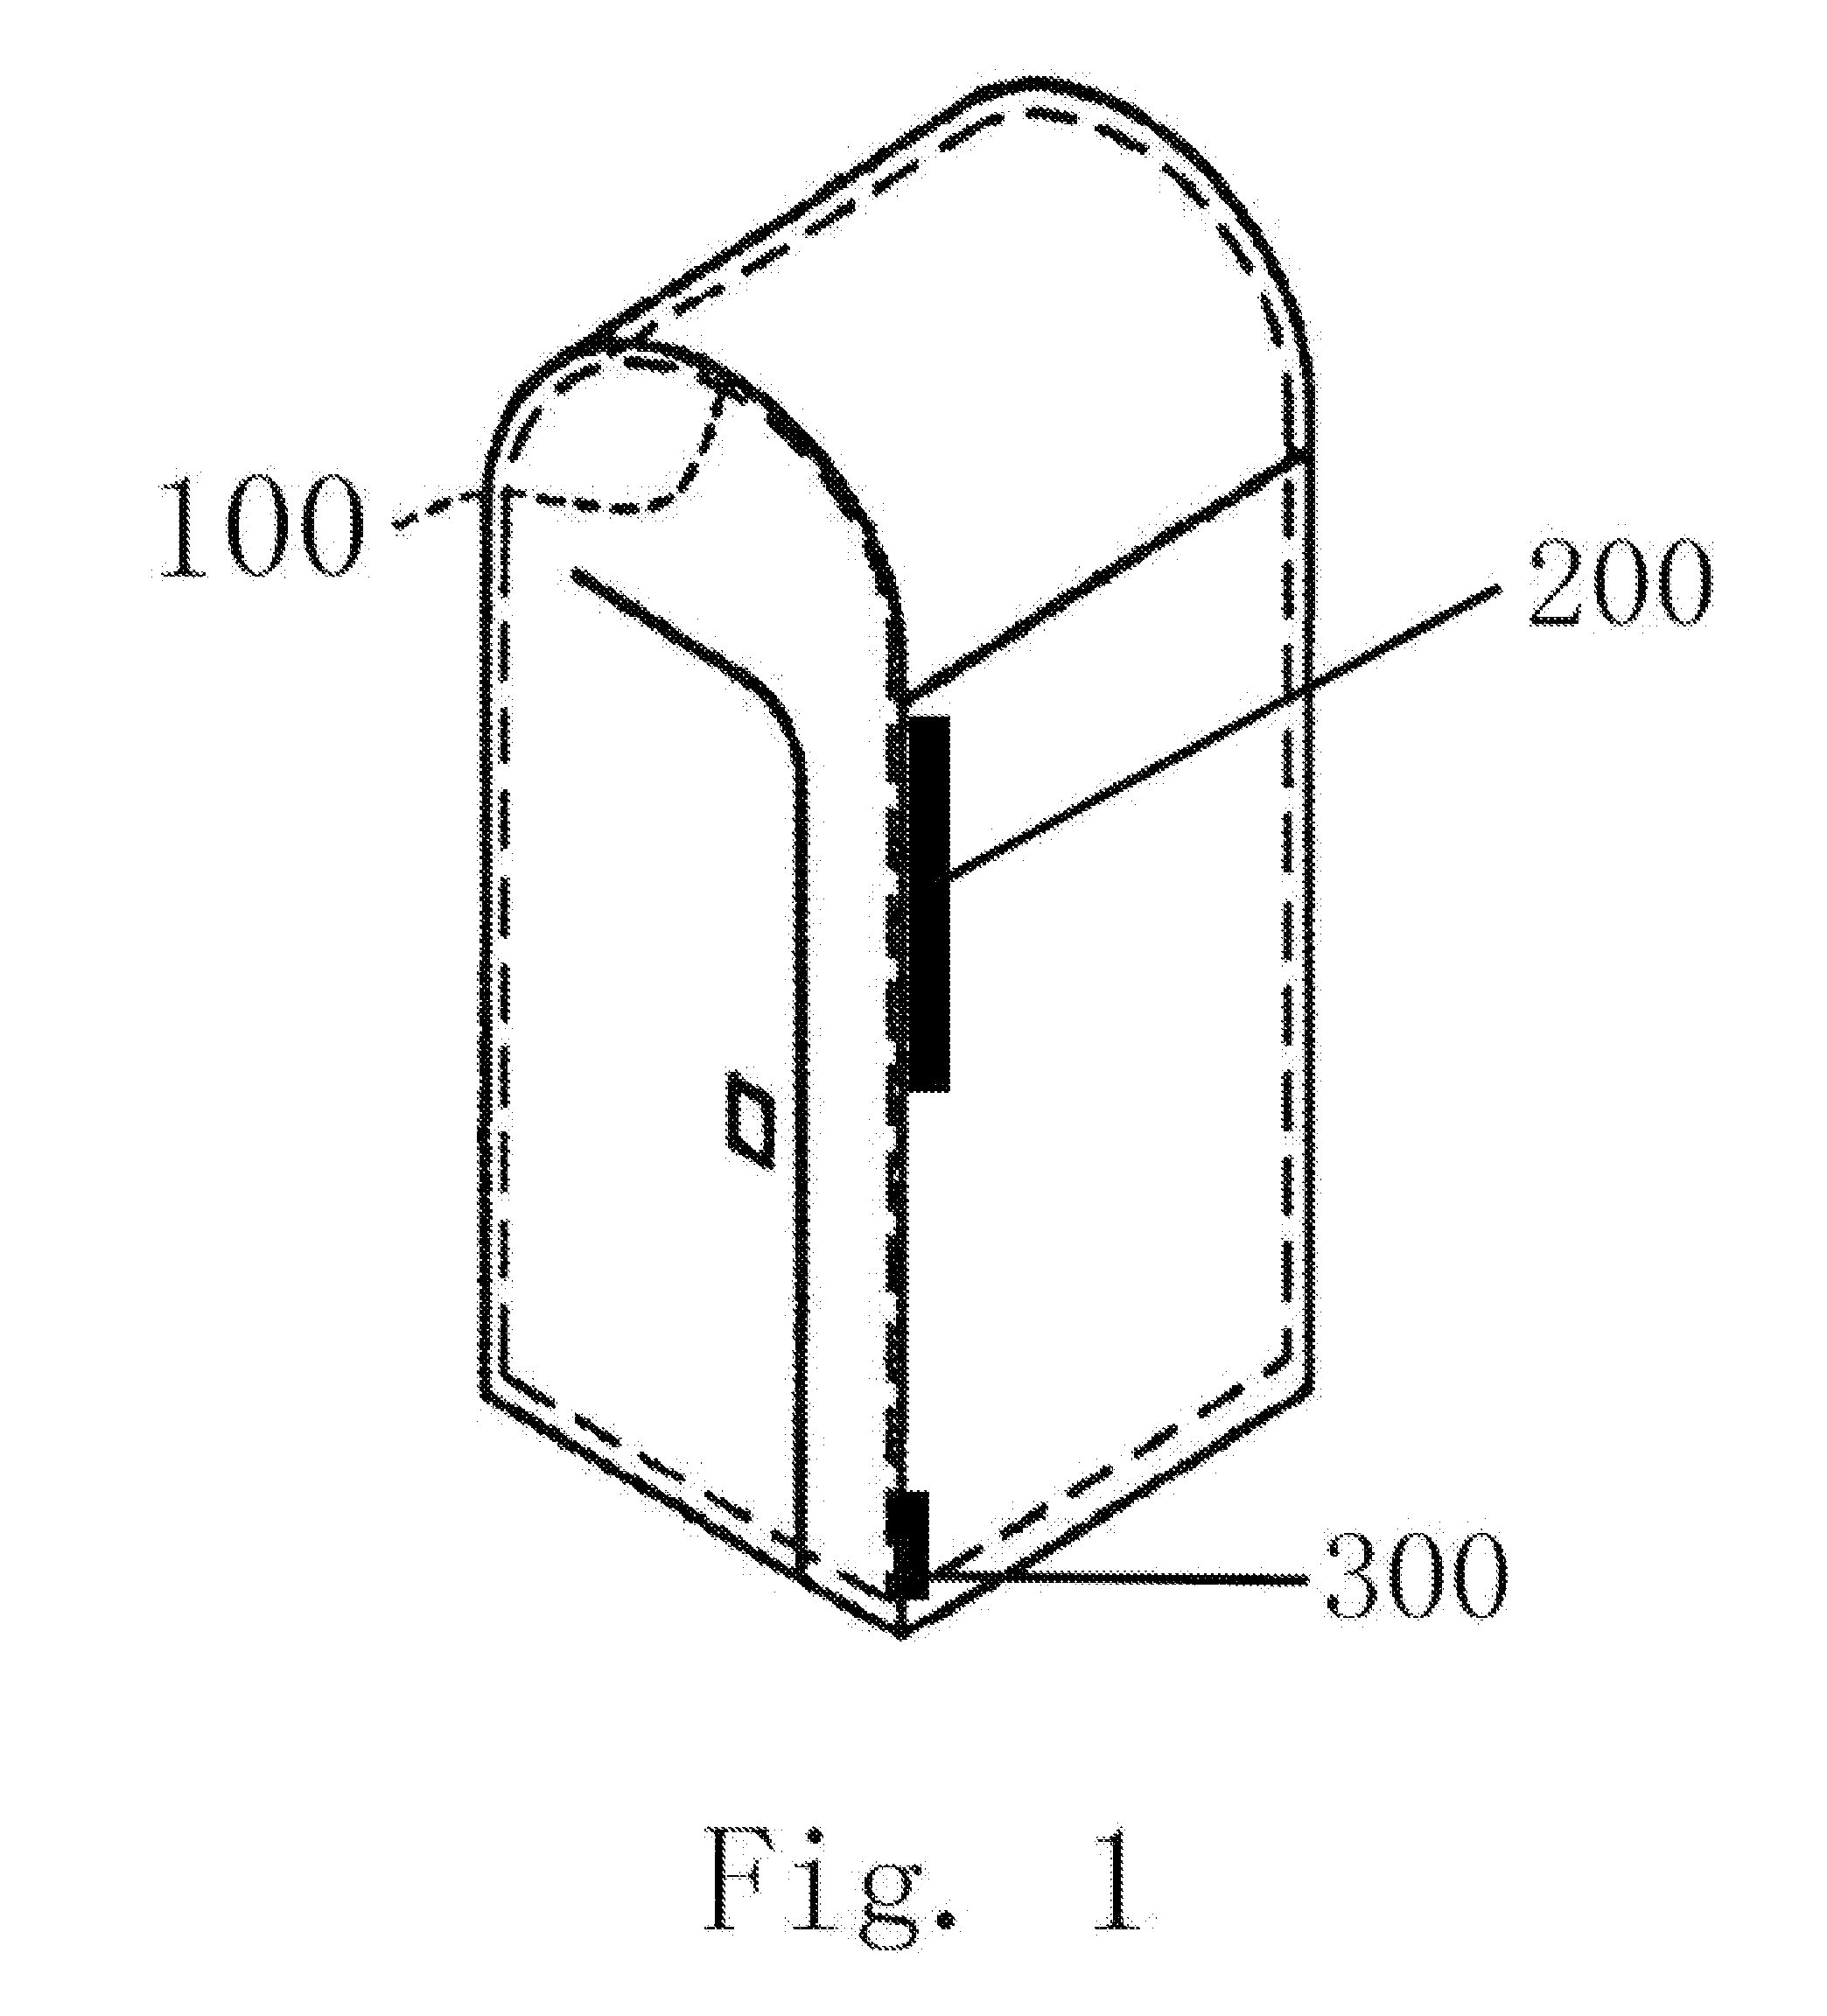 Systems and Methods For Cleaning and Monitoring Portable Toilets